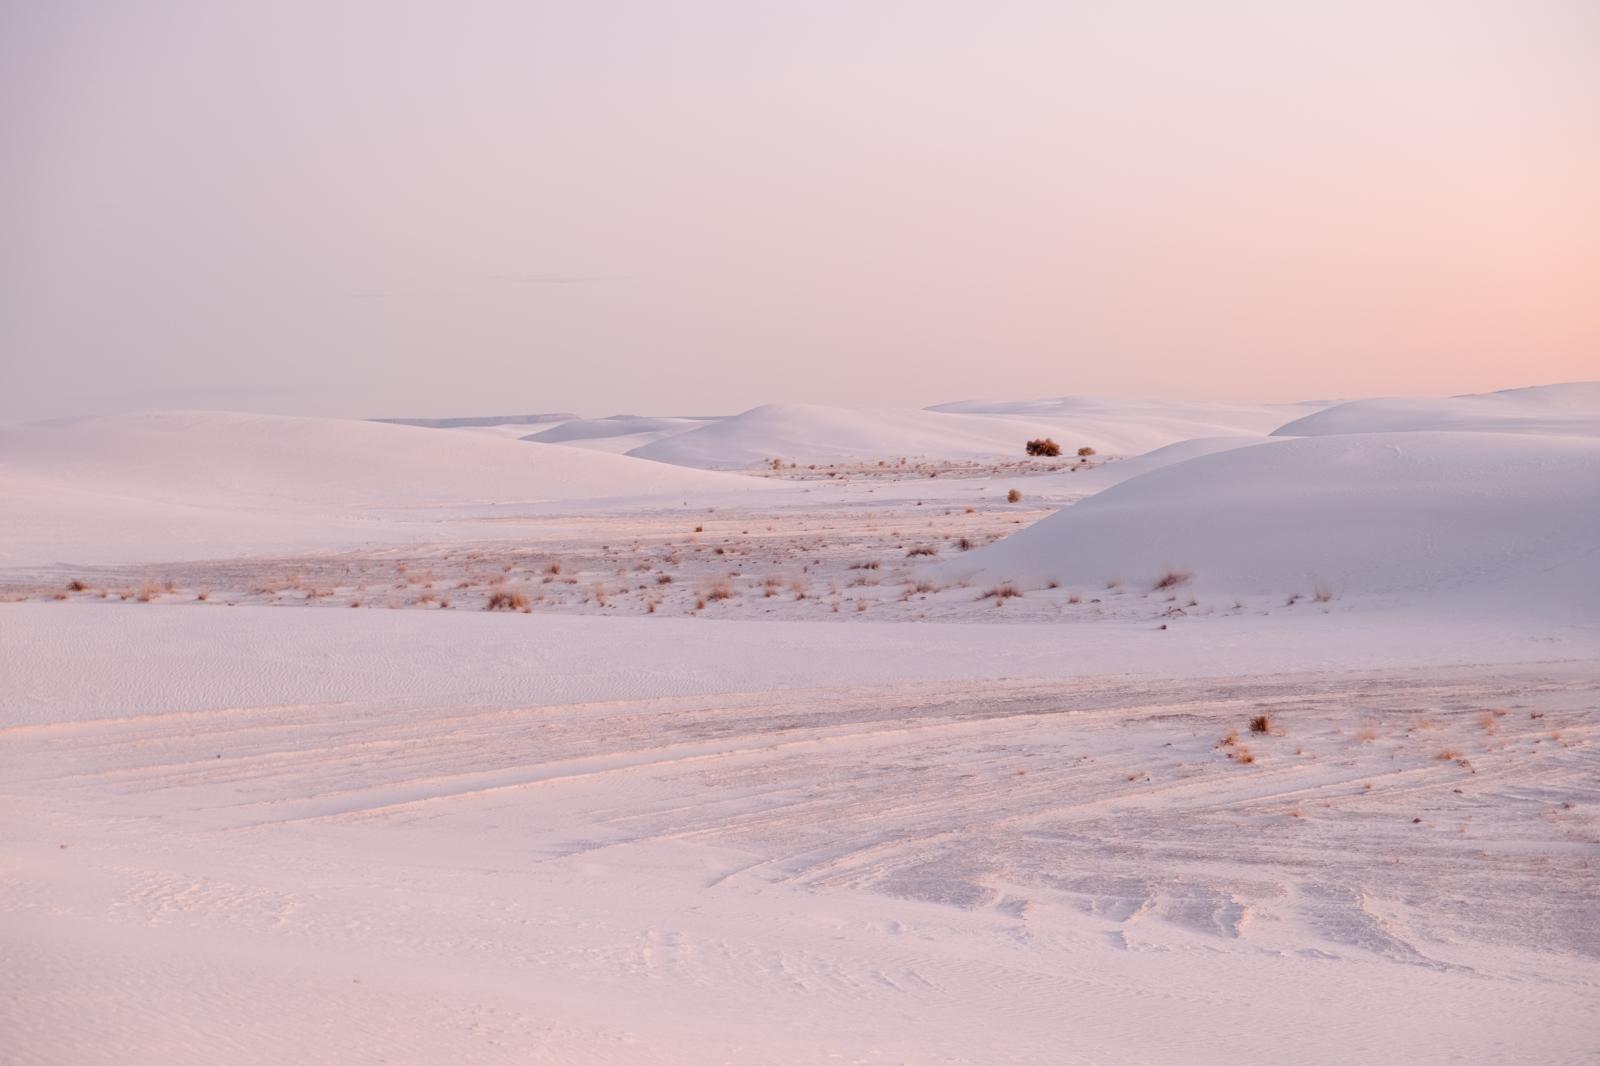 White Sands Sunrise, New Mexico | Buy this image